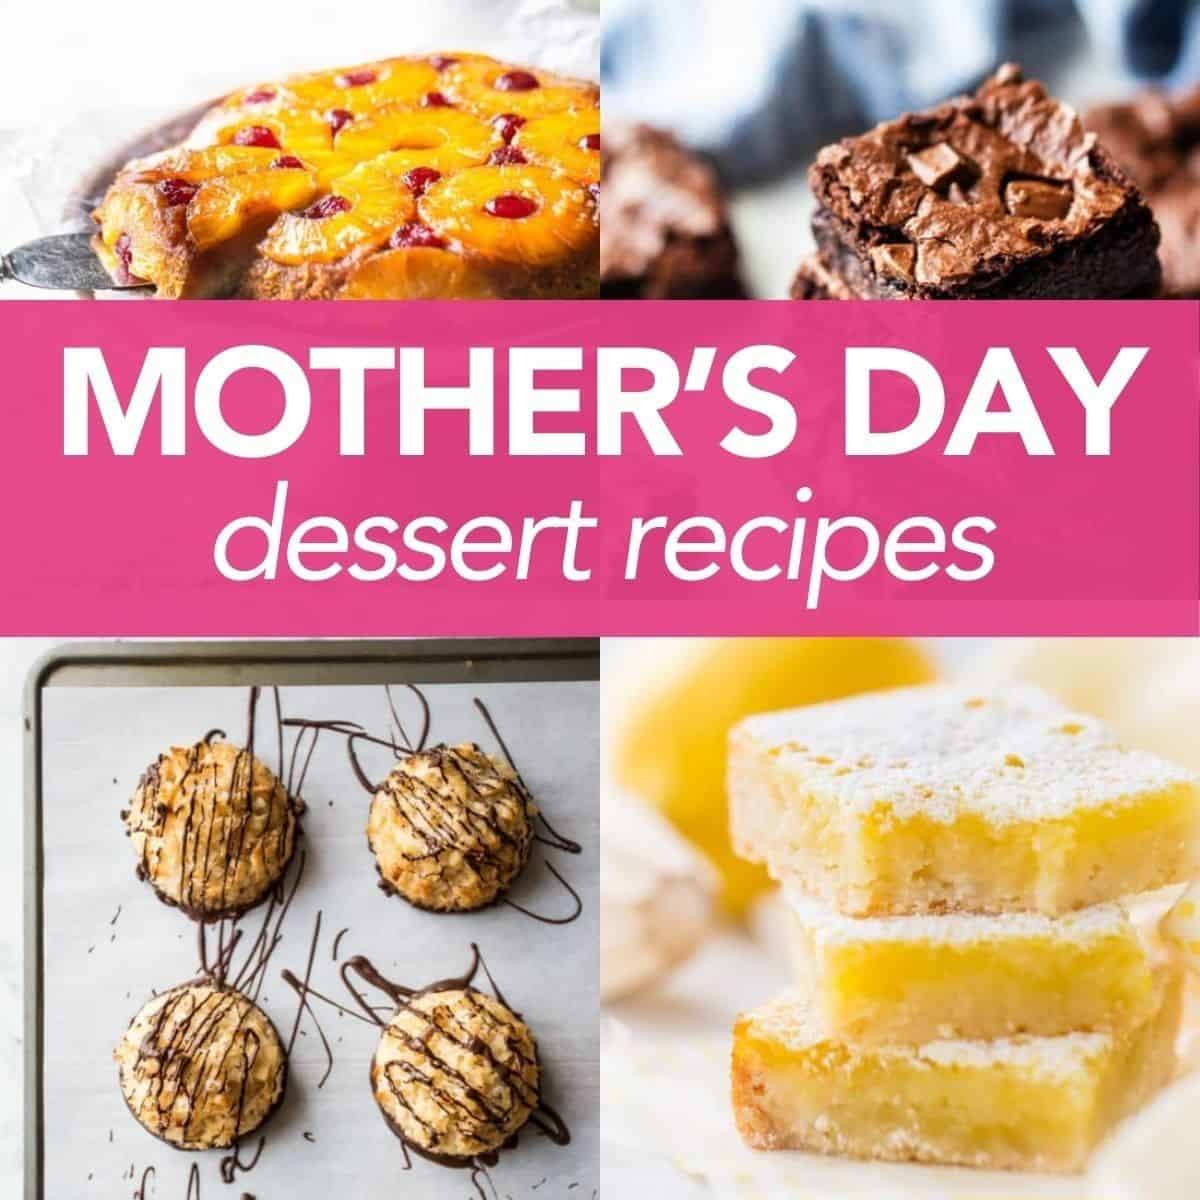 collage of Mother's Day dessert recipes such as strawberry shortcake, bread pudding, brownies.